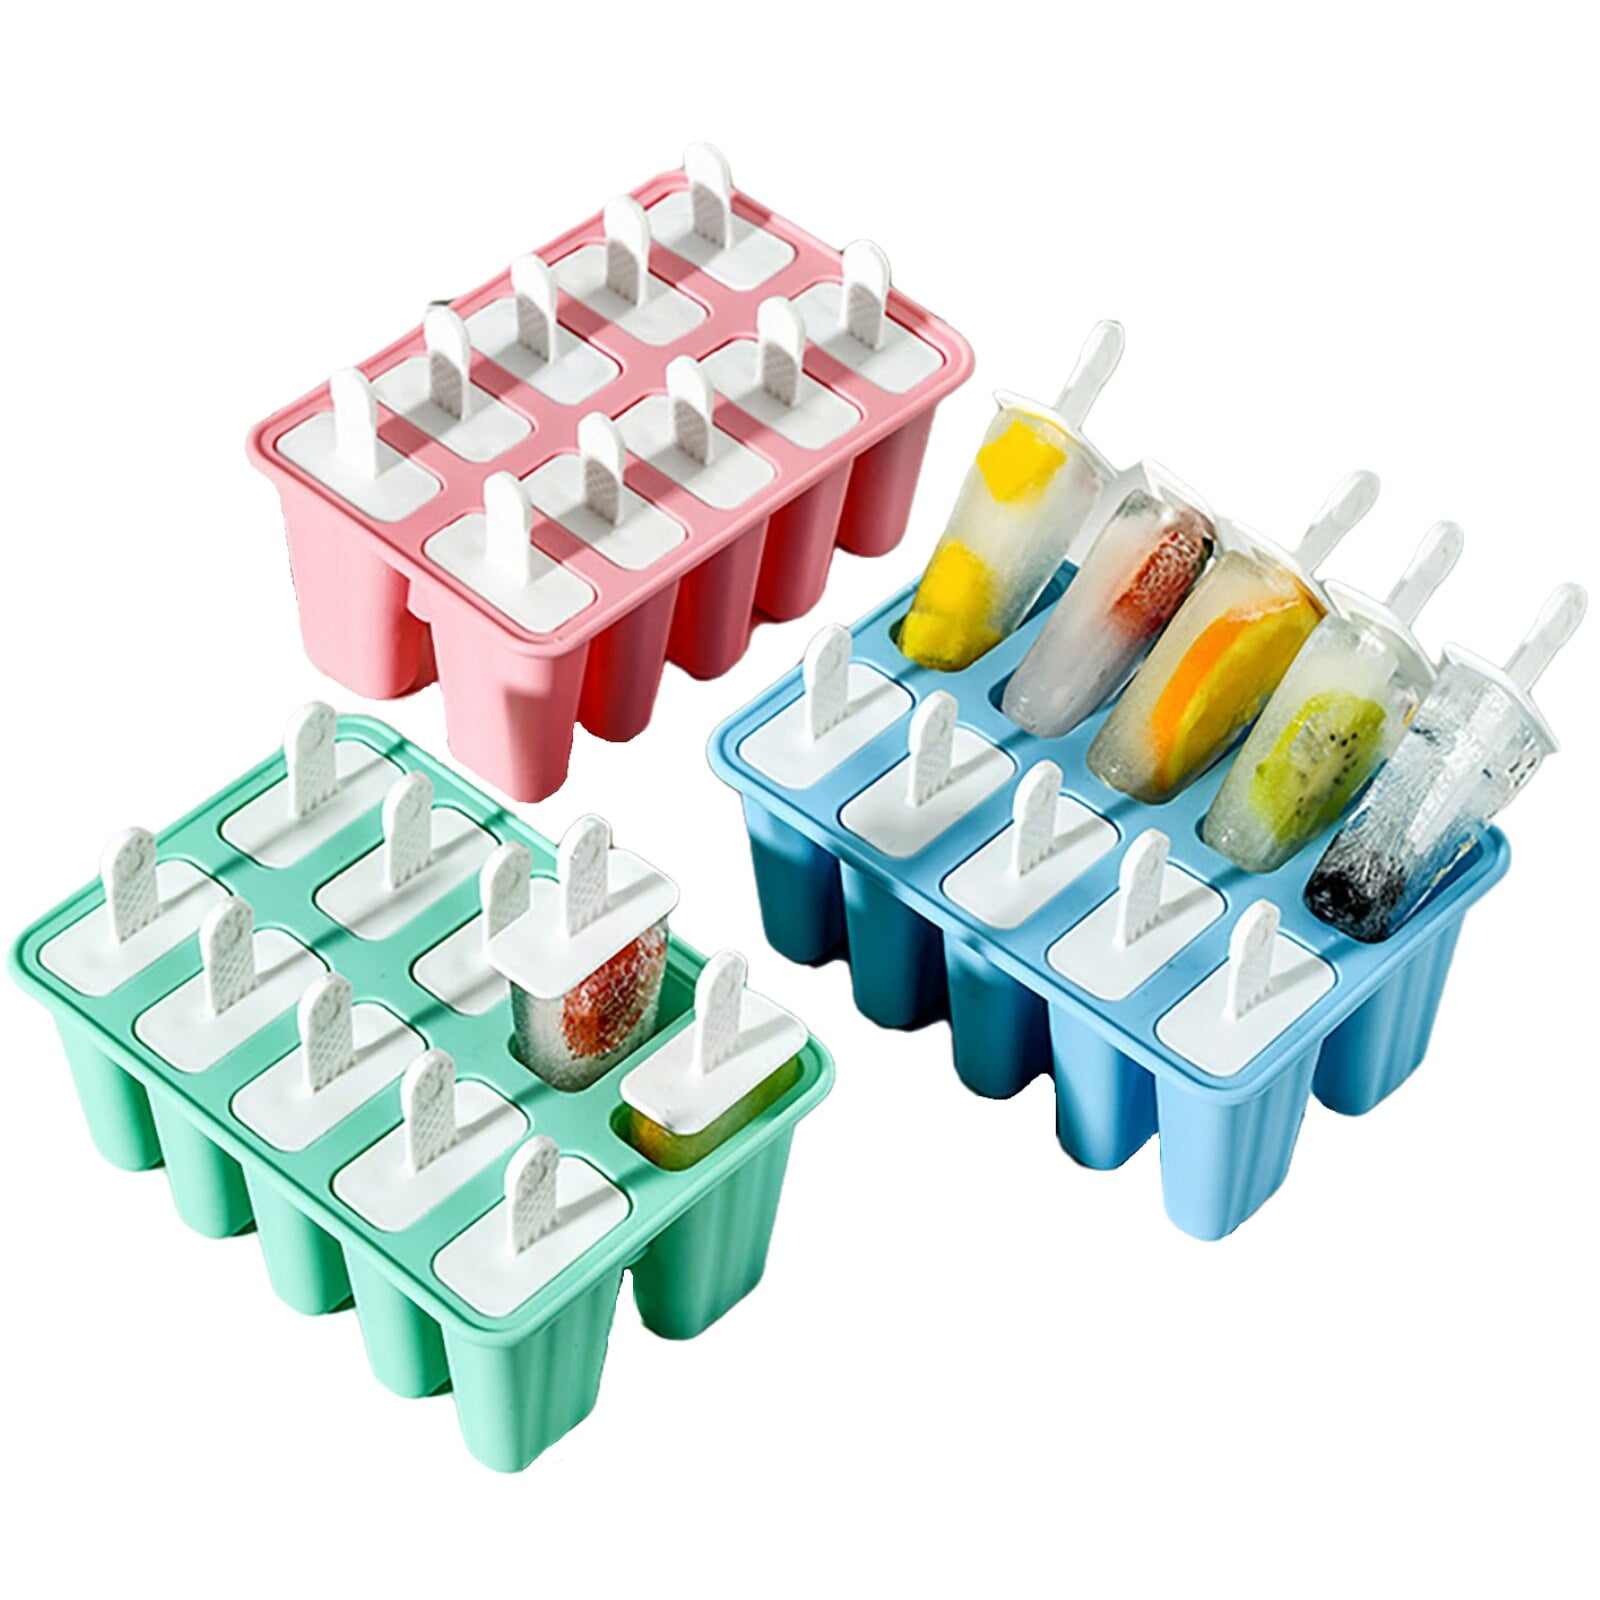 Ice Pop Maker - these molds will change your Summer!! 